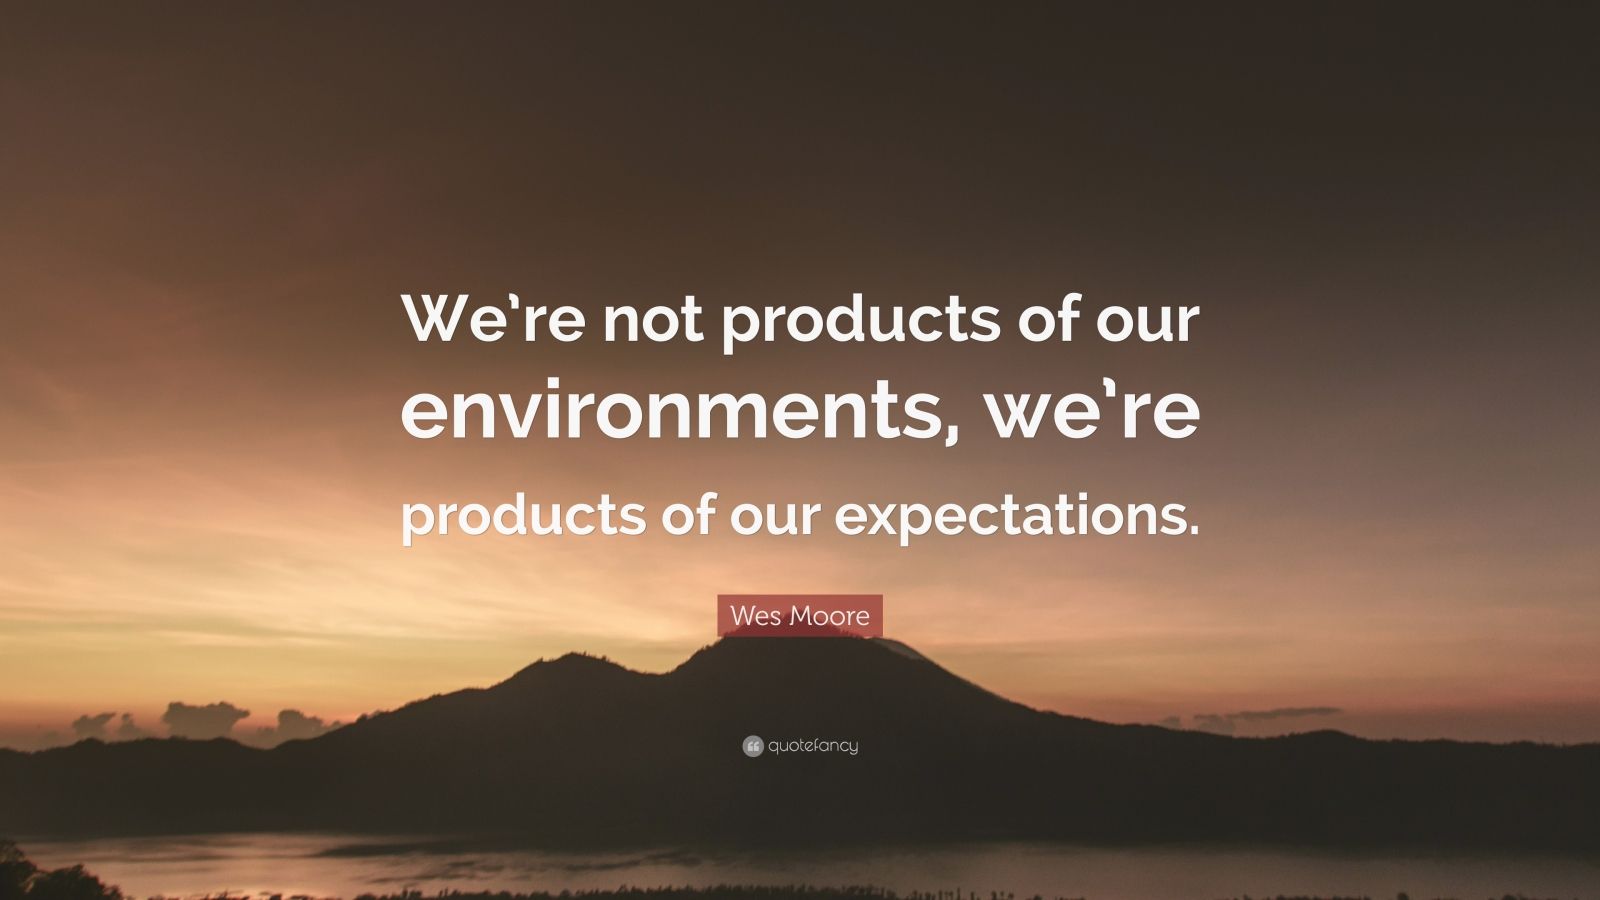 Wes Moore Quote: “We’re not products of our environments, we’re